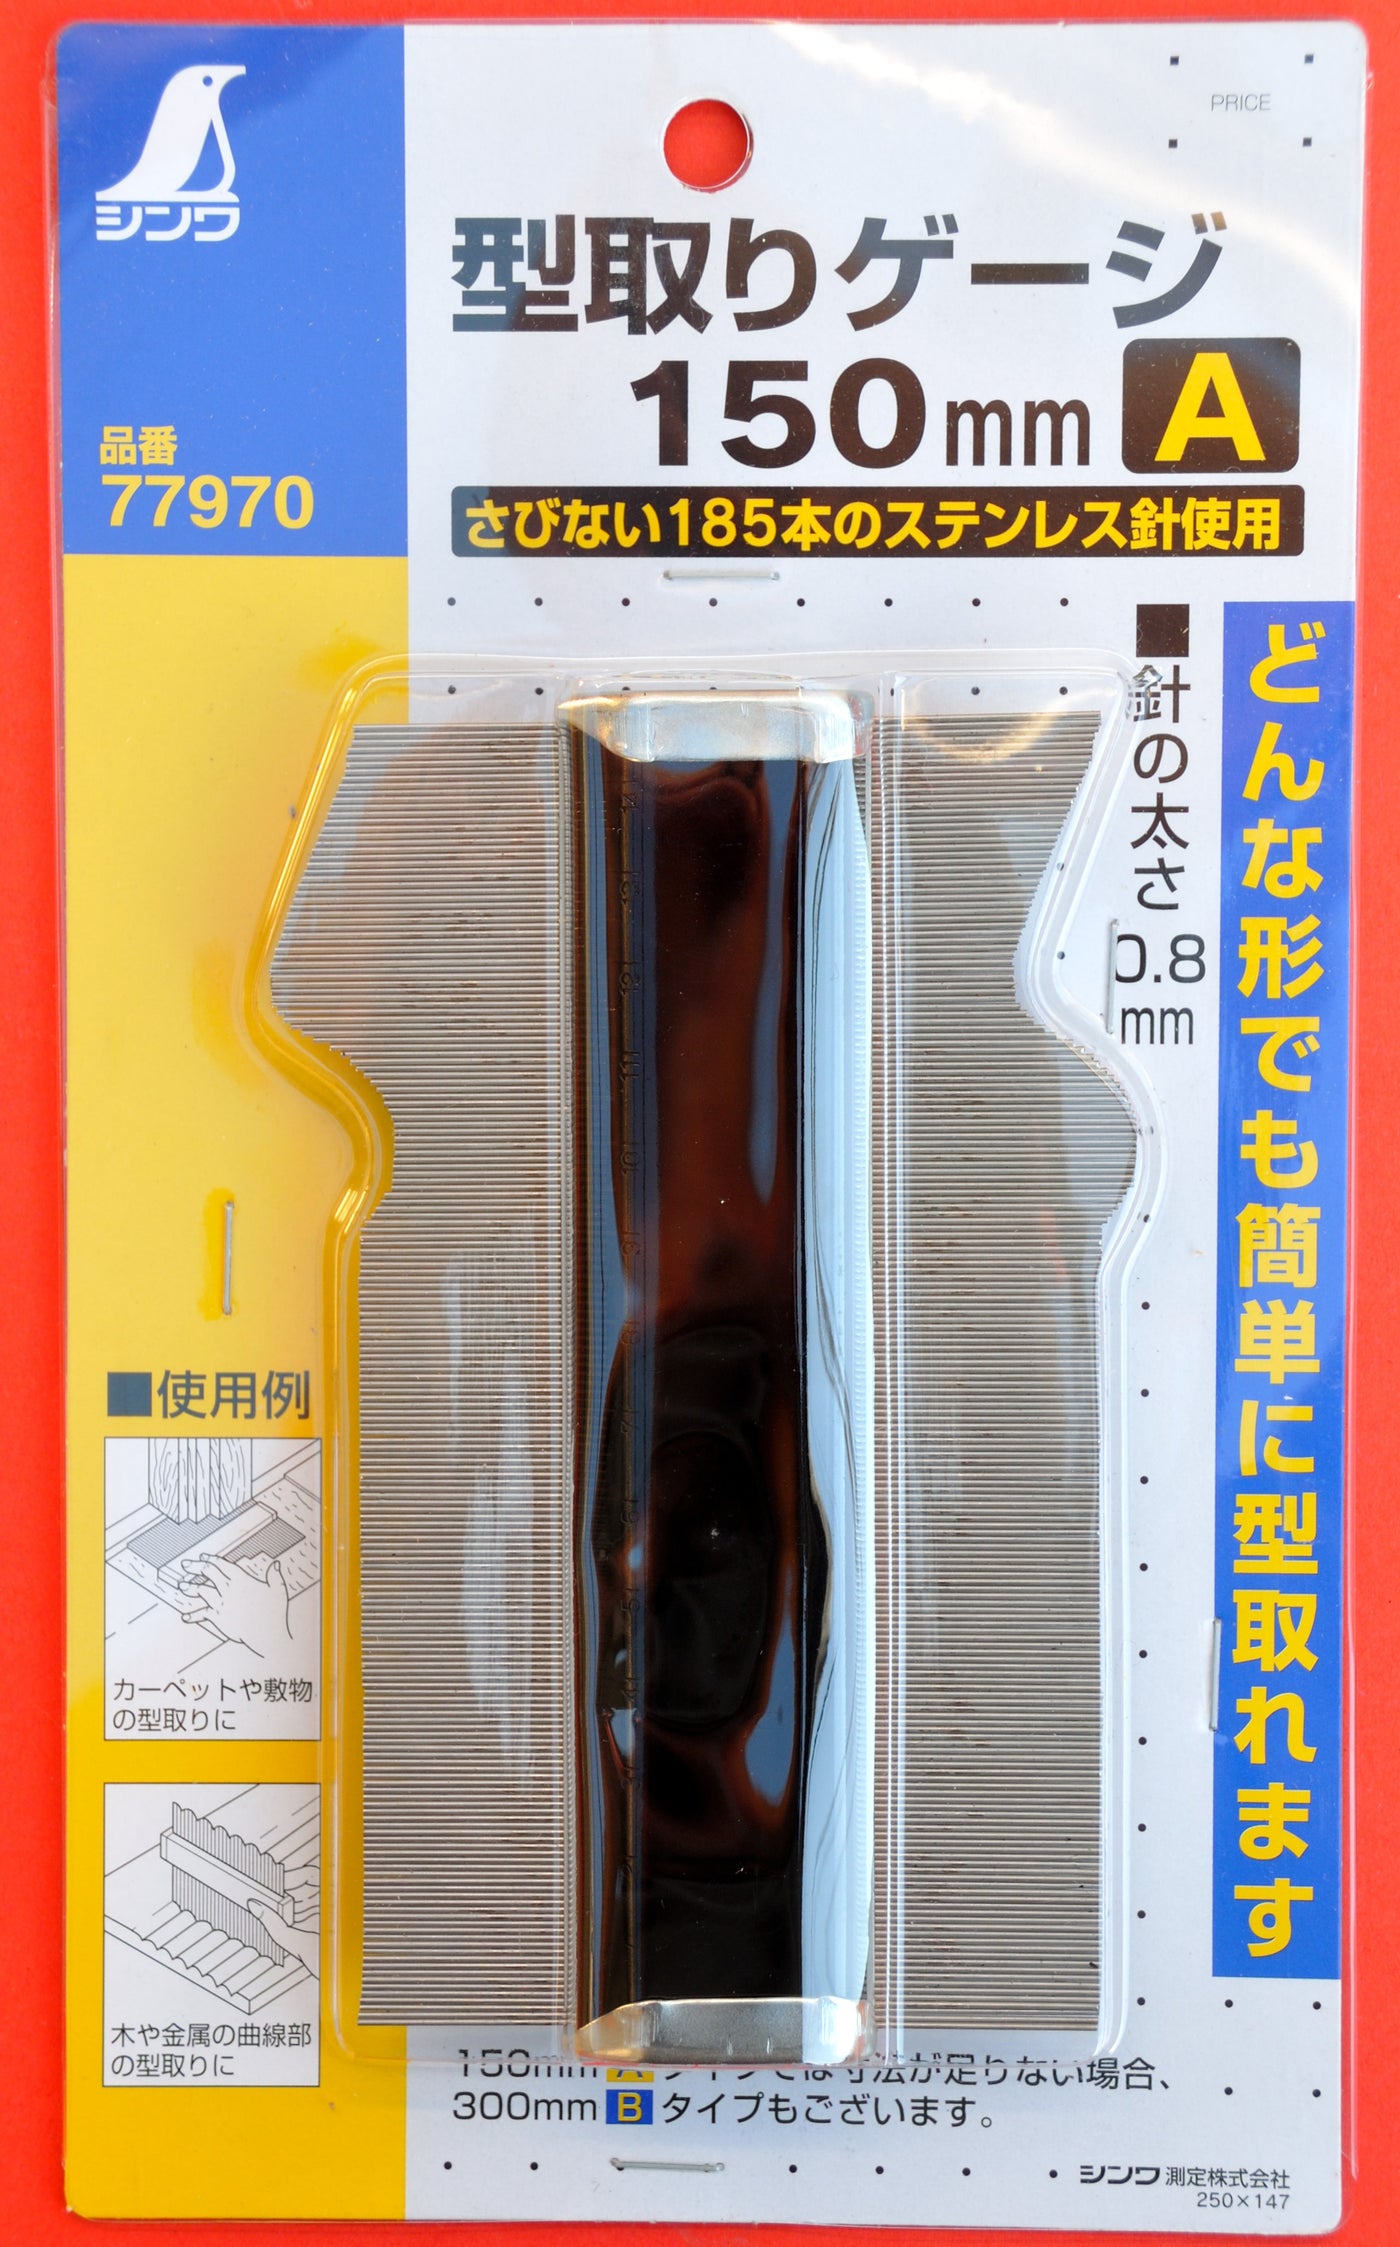 Shinwa Japanese Compass Outdoor Camping Tool 75672 for sale online